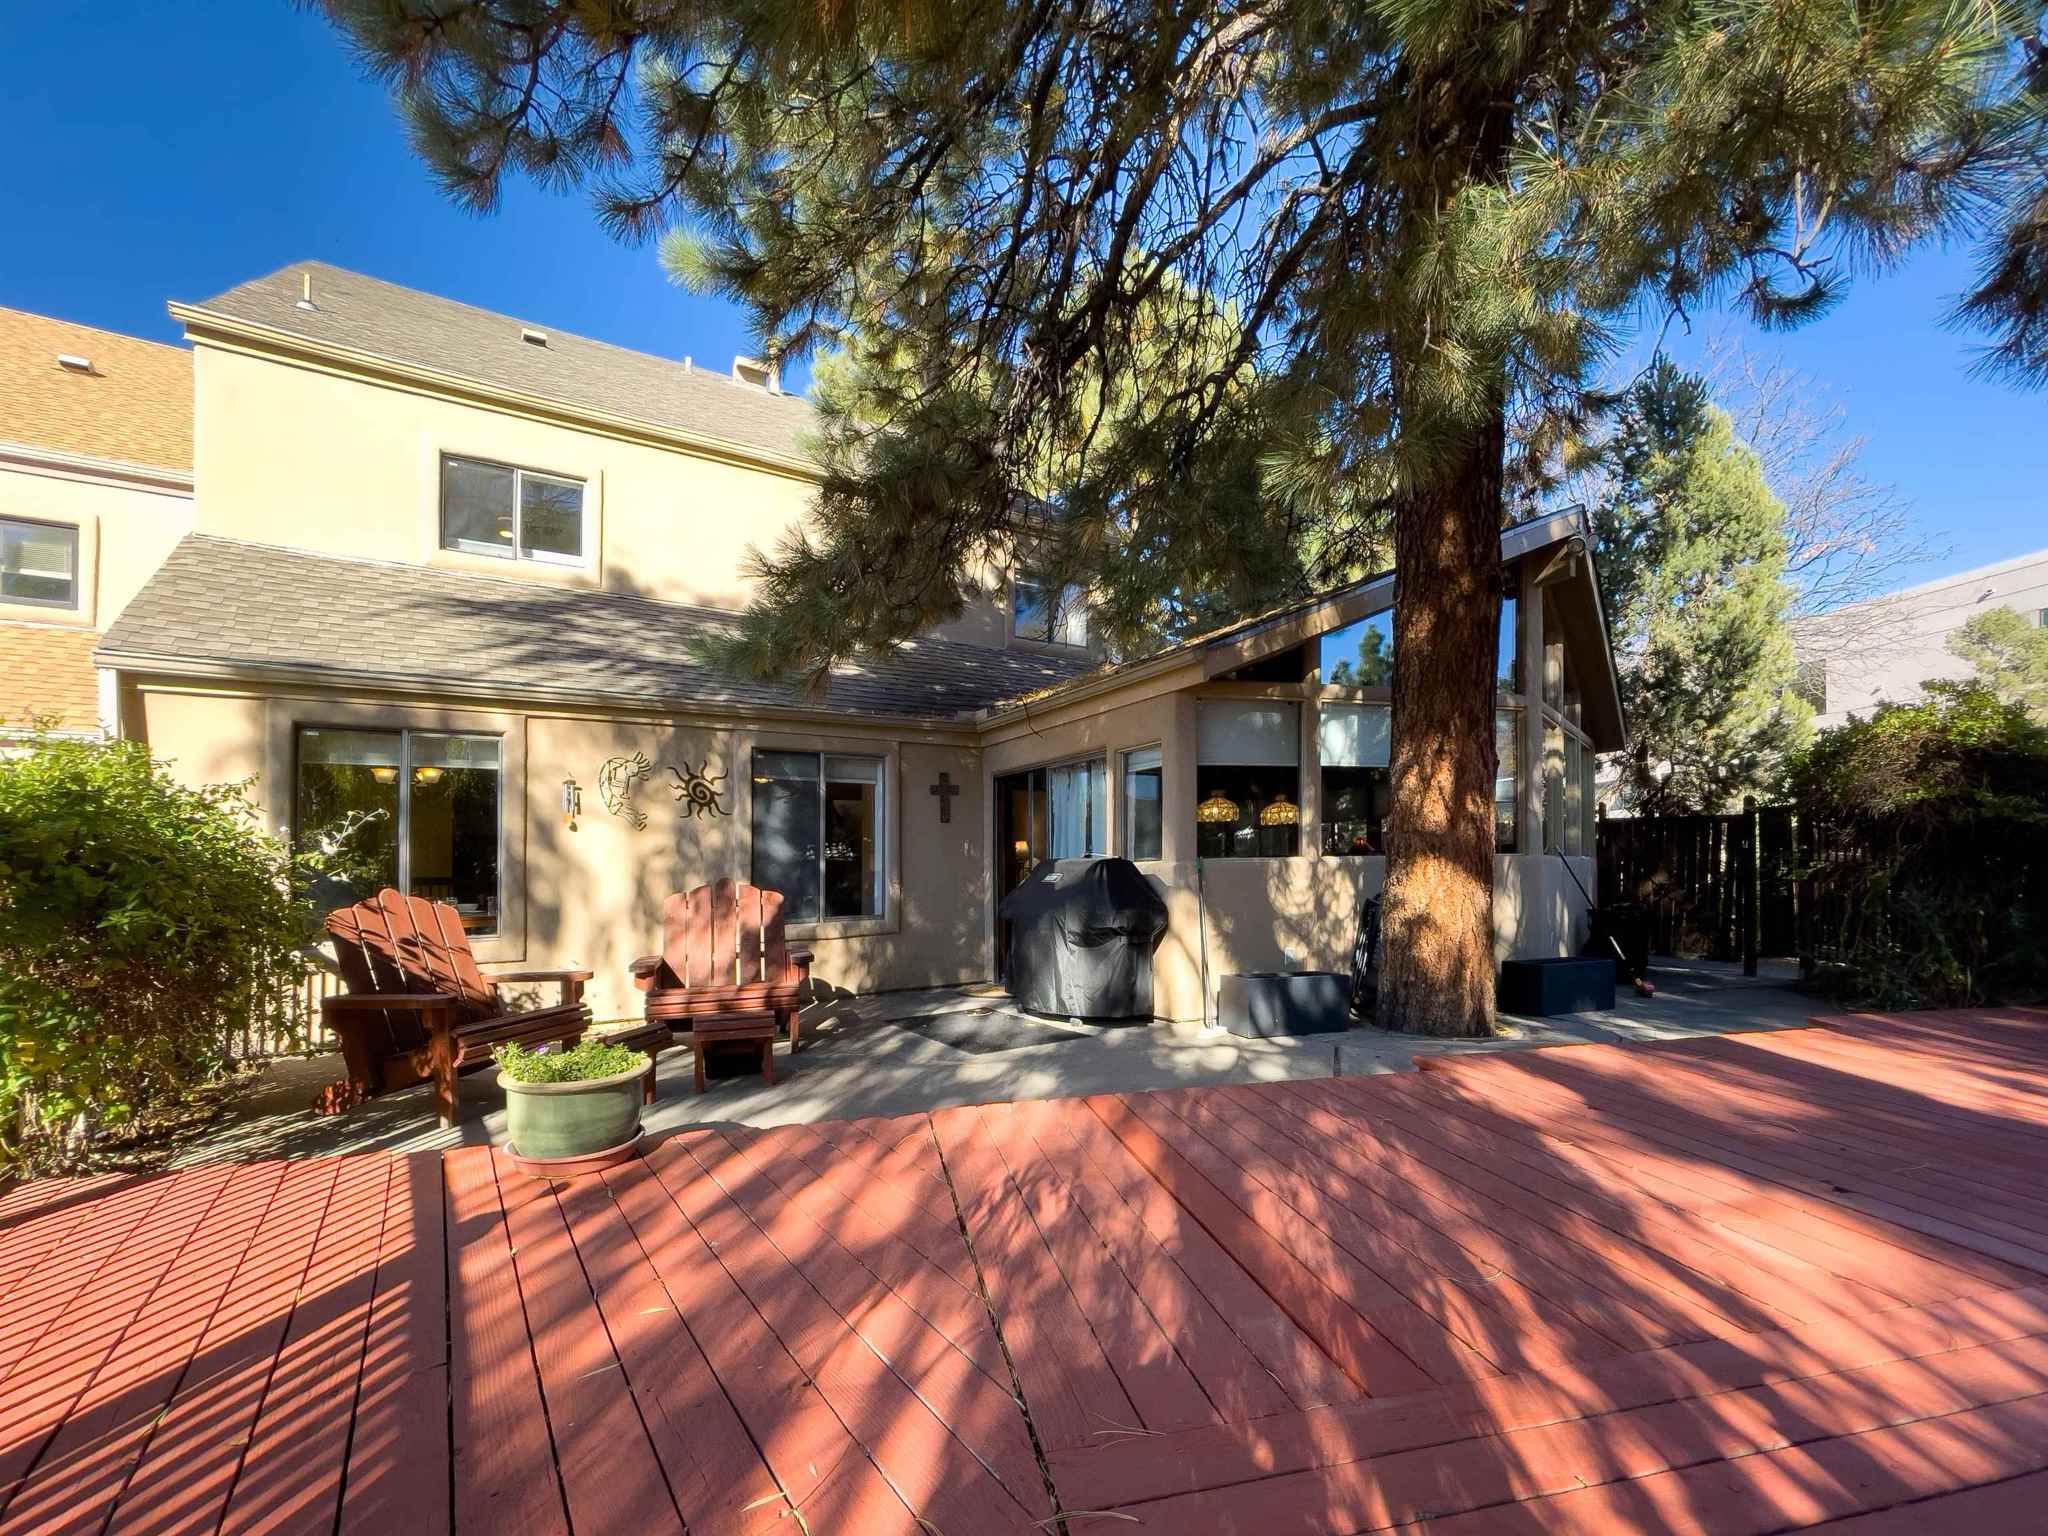 47 TIMBER RIDGE, Los Alamos, New Mexico 87544, 3 Bedrooms Bedrooms, ,3 BathroomsBathrooms,Residential,For Sale,47 TIMBER RIDGE,202104825